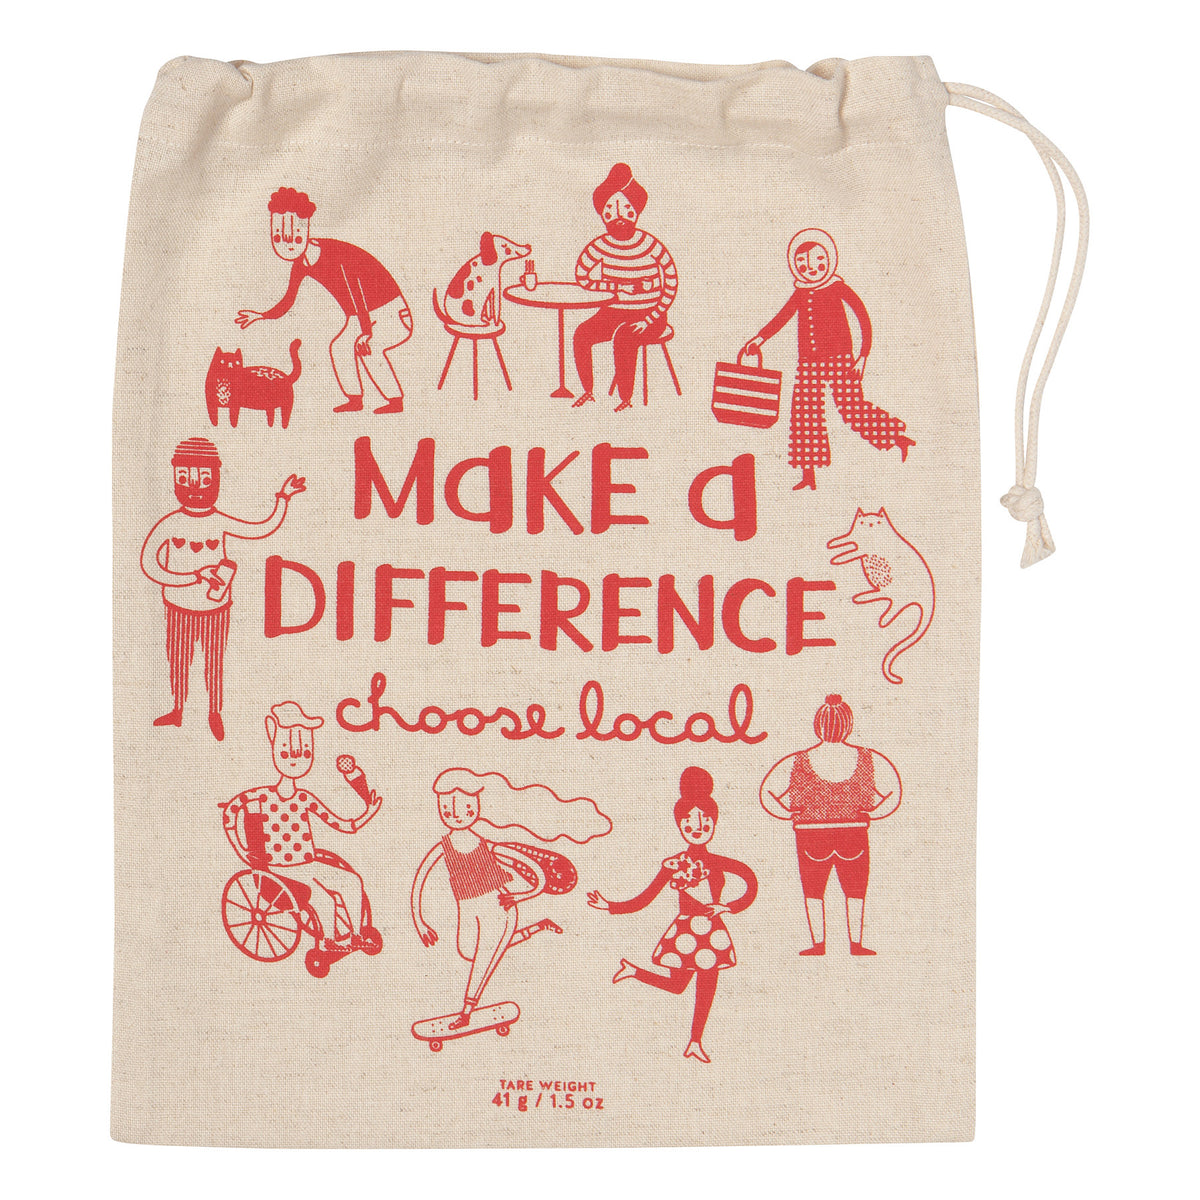 Shop Local Produce Bags, Set of 3